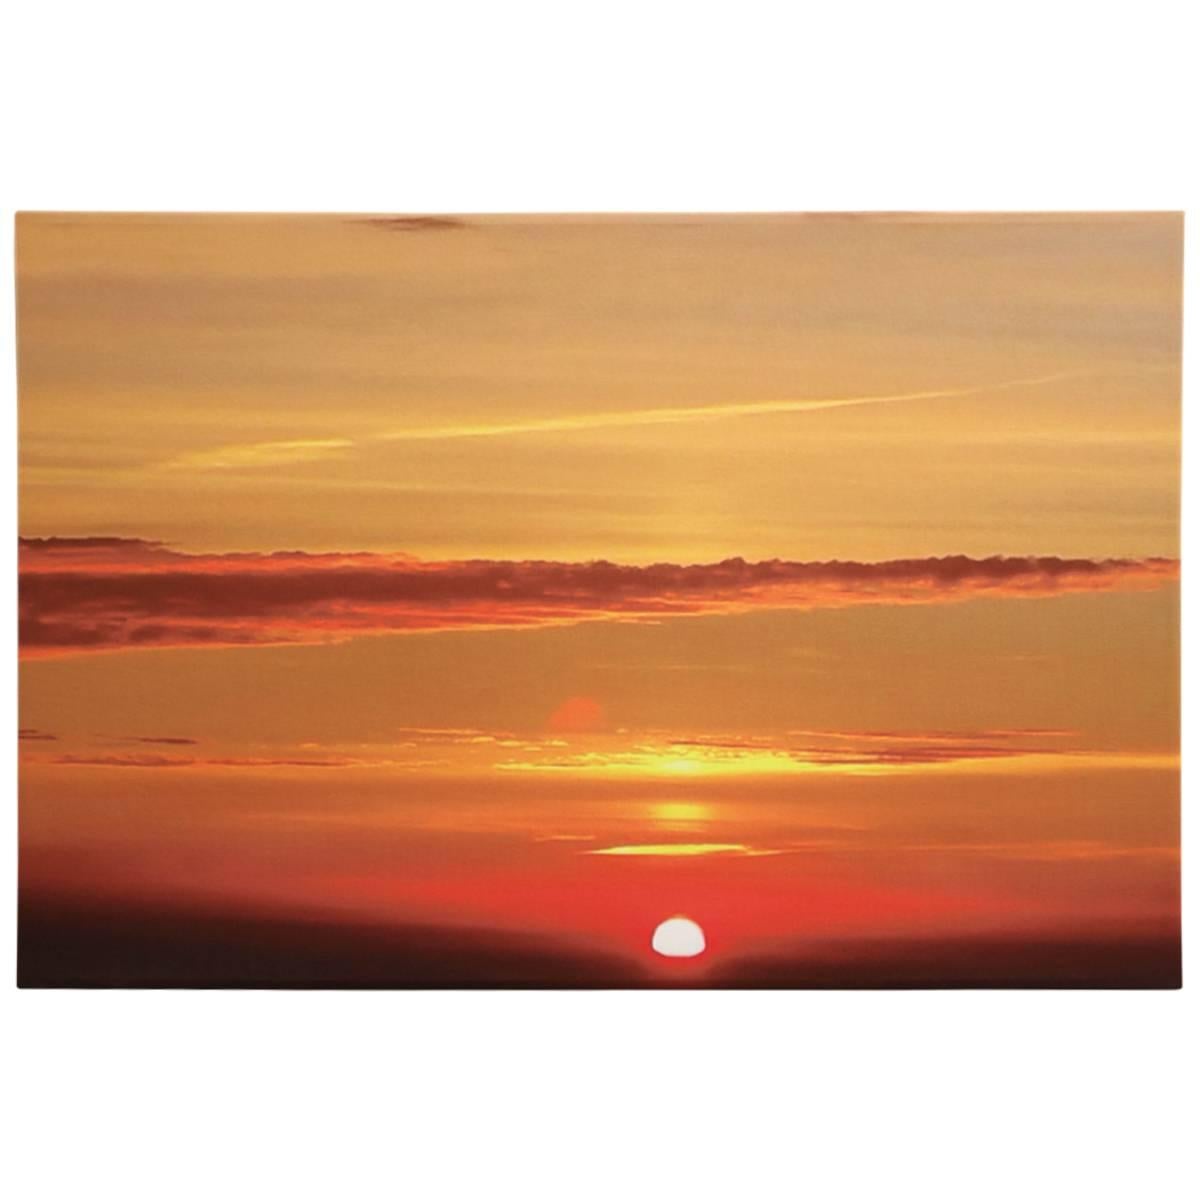 Contemporary Photograph "Sunset" by Leok For Sale